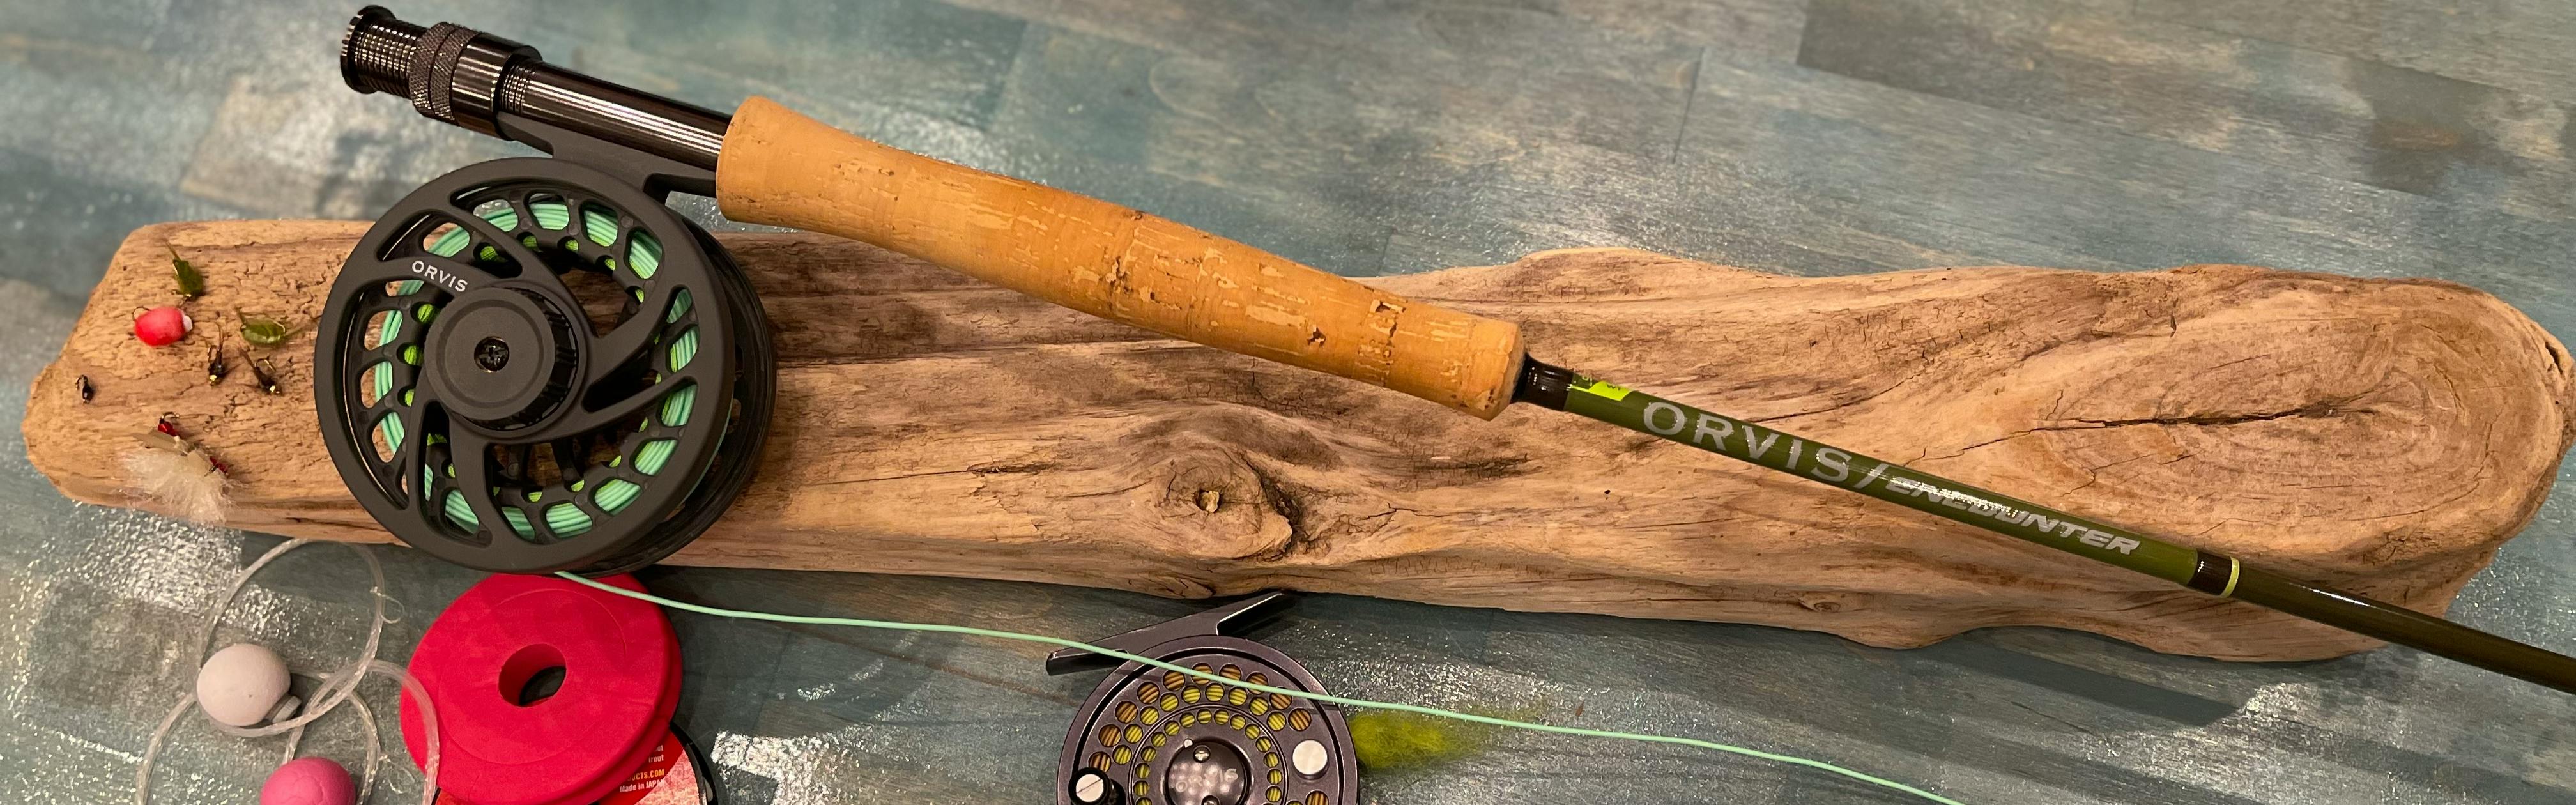 Expert Review: Orvis Encounter Fly Rod Outfit